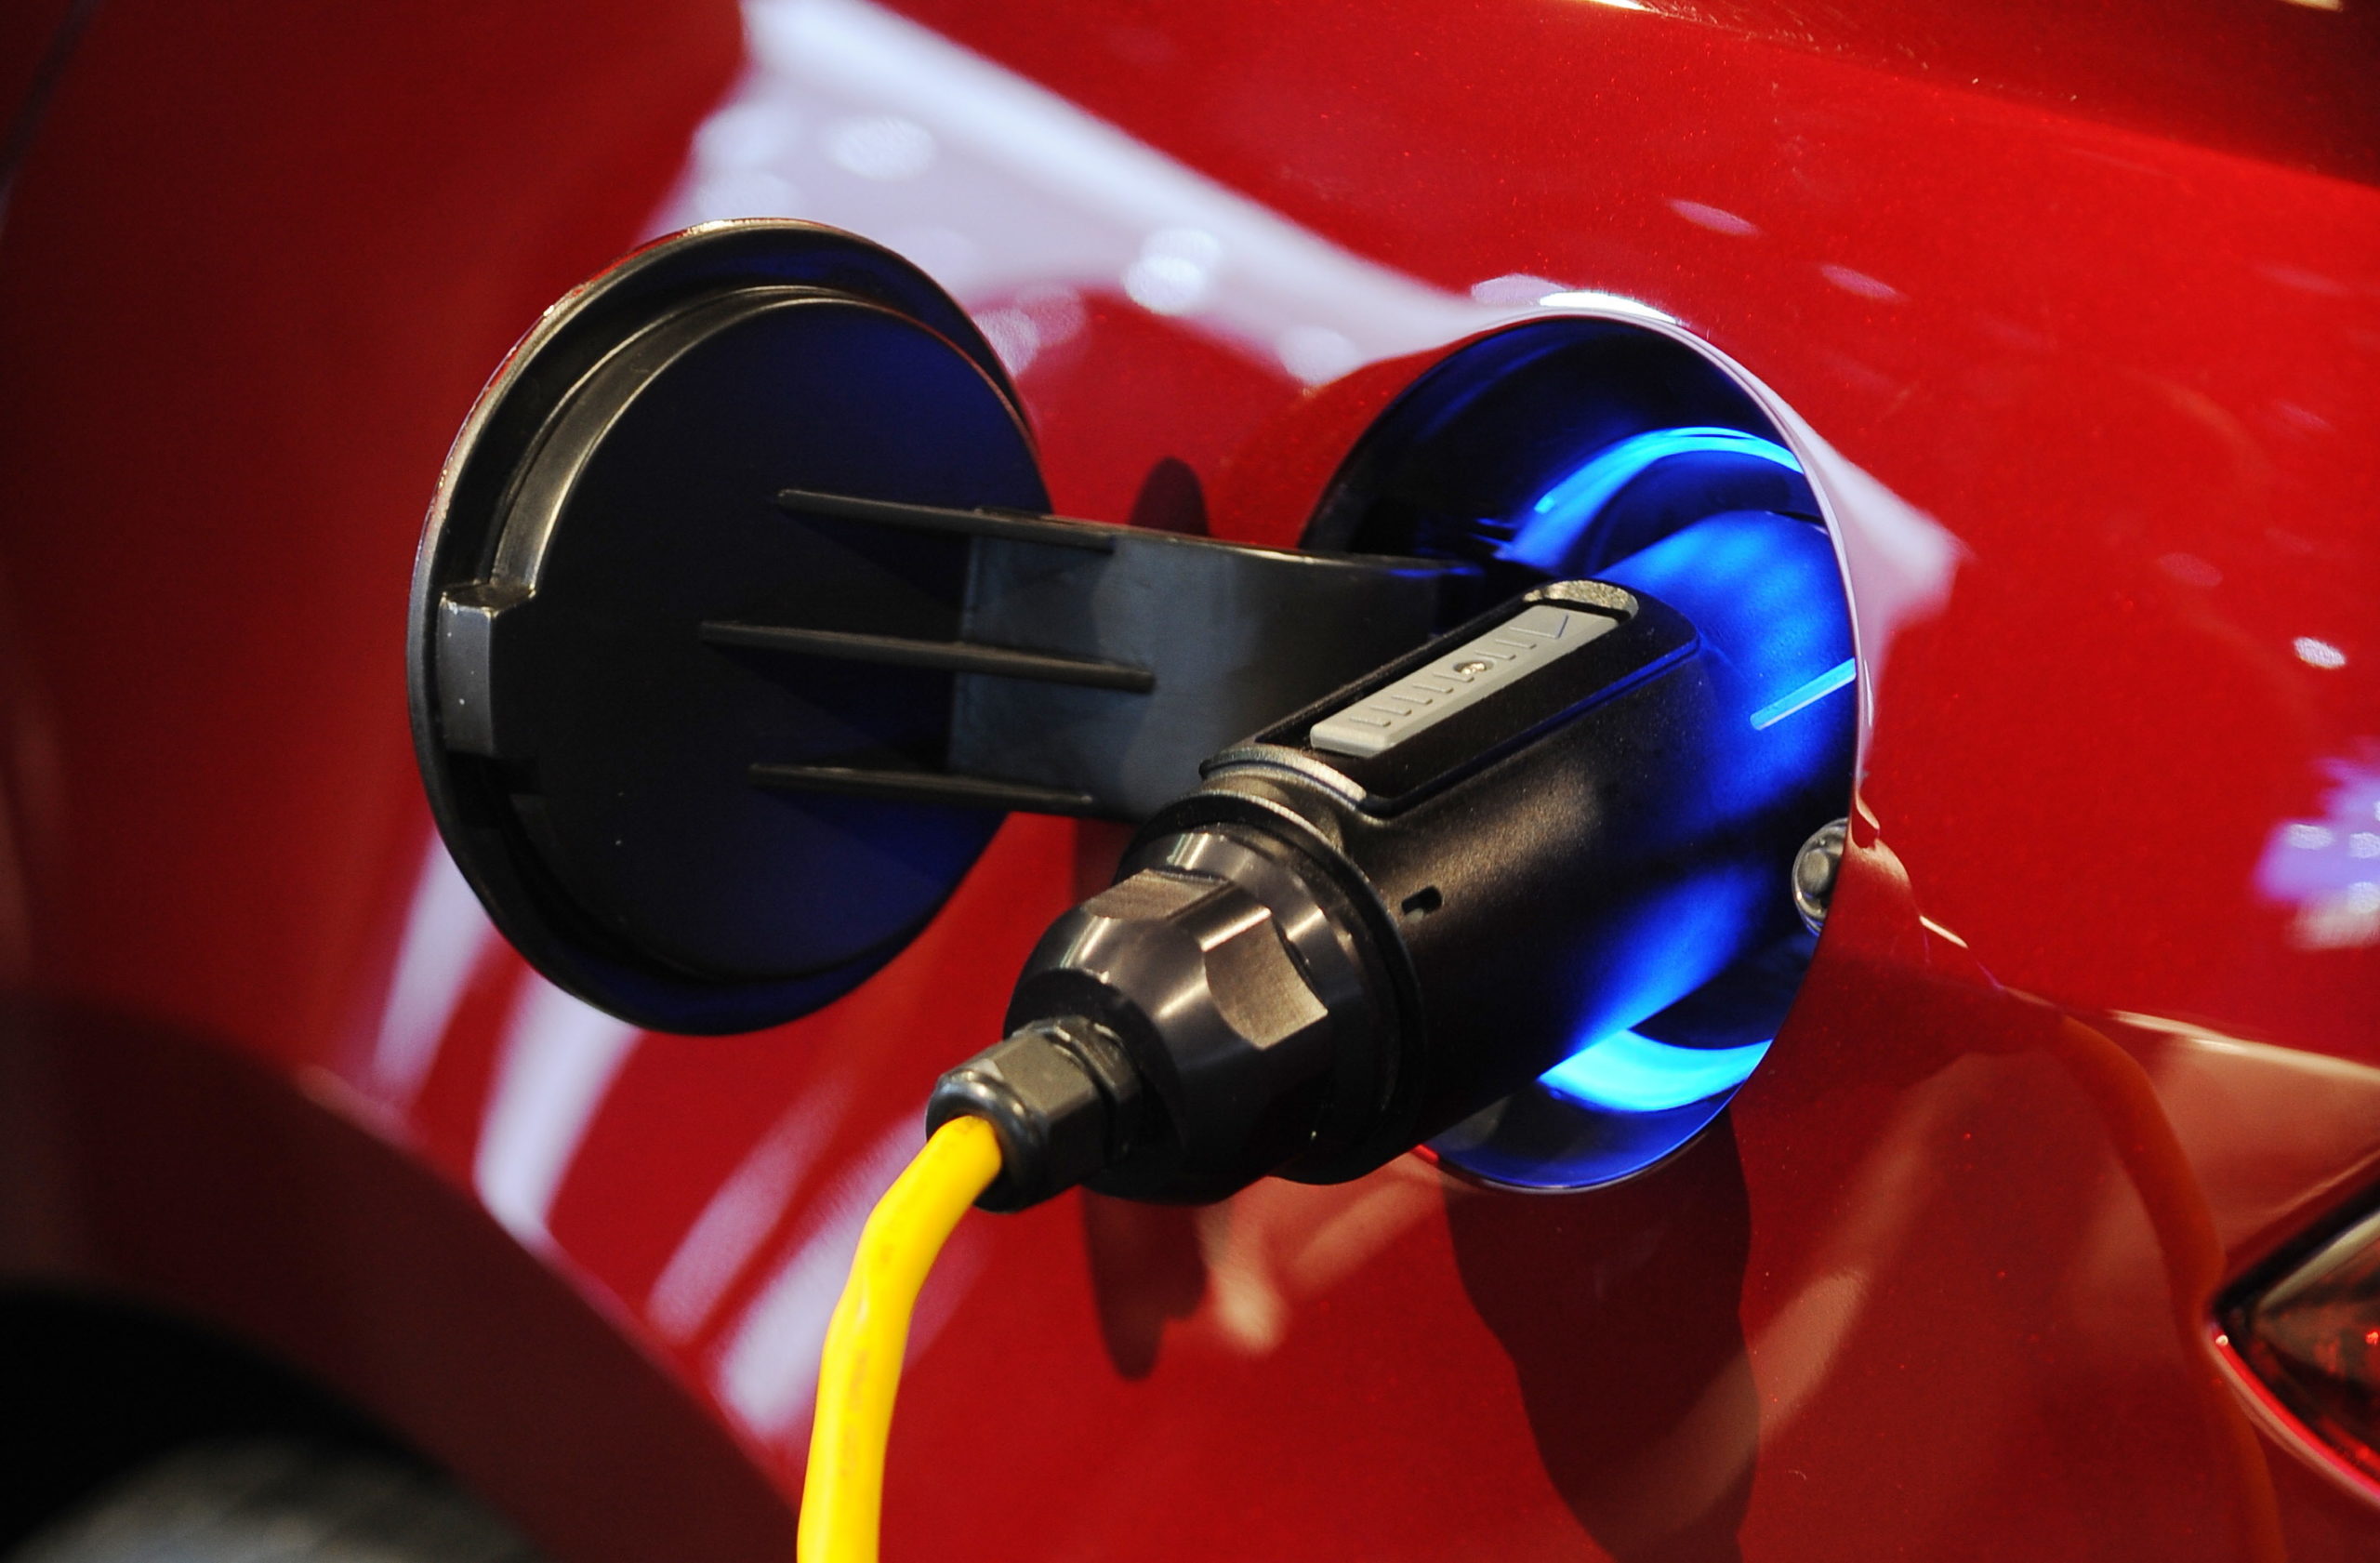 A Universal Charging Standard Is Needed For Mass EV Adoption